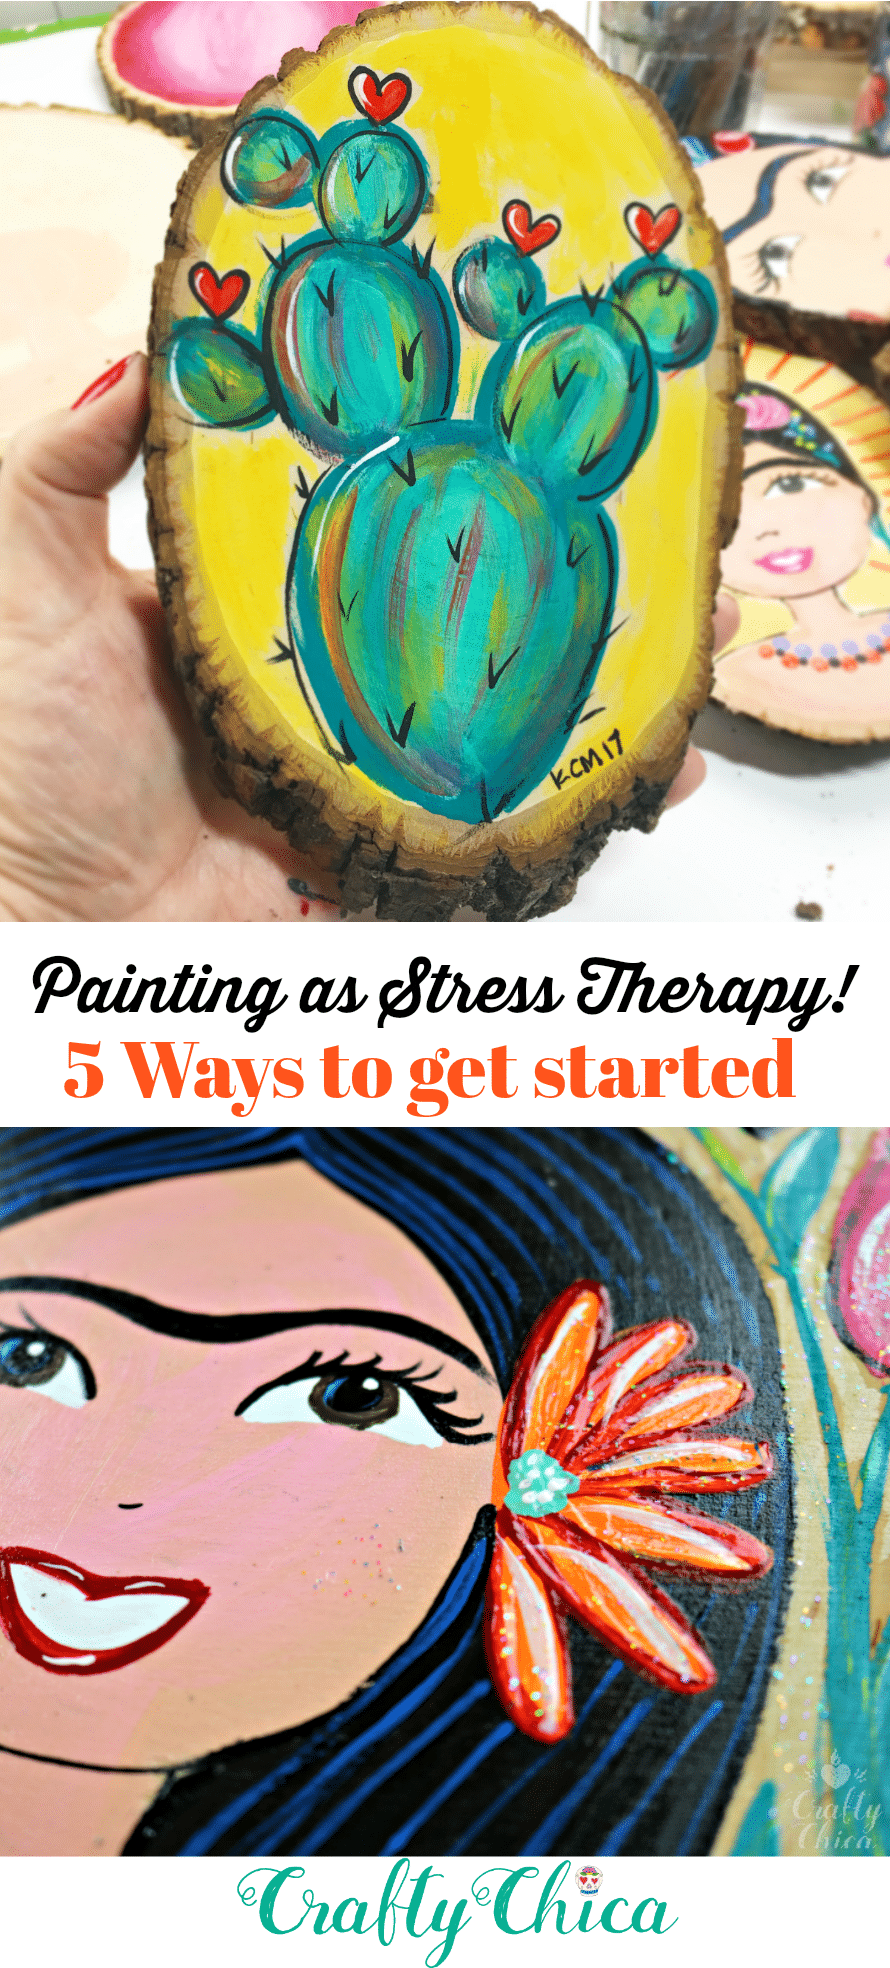 How to paint away stress, by Crafty Chica